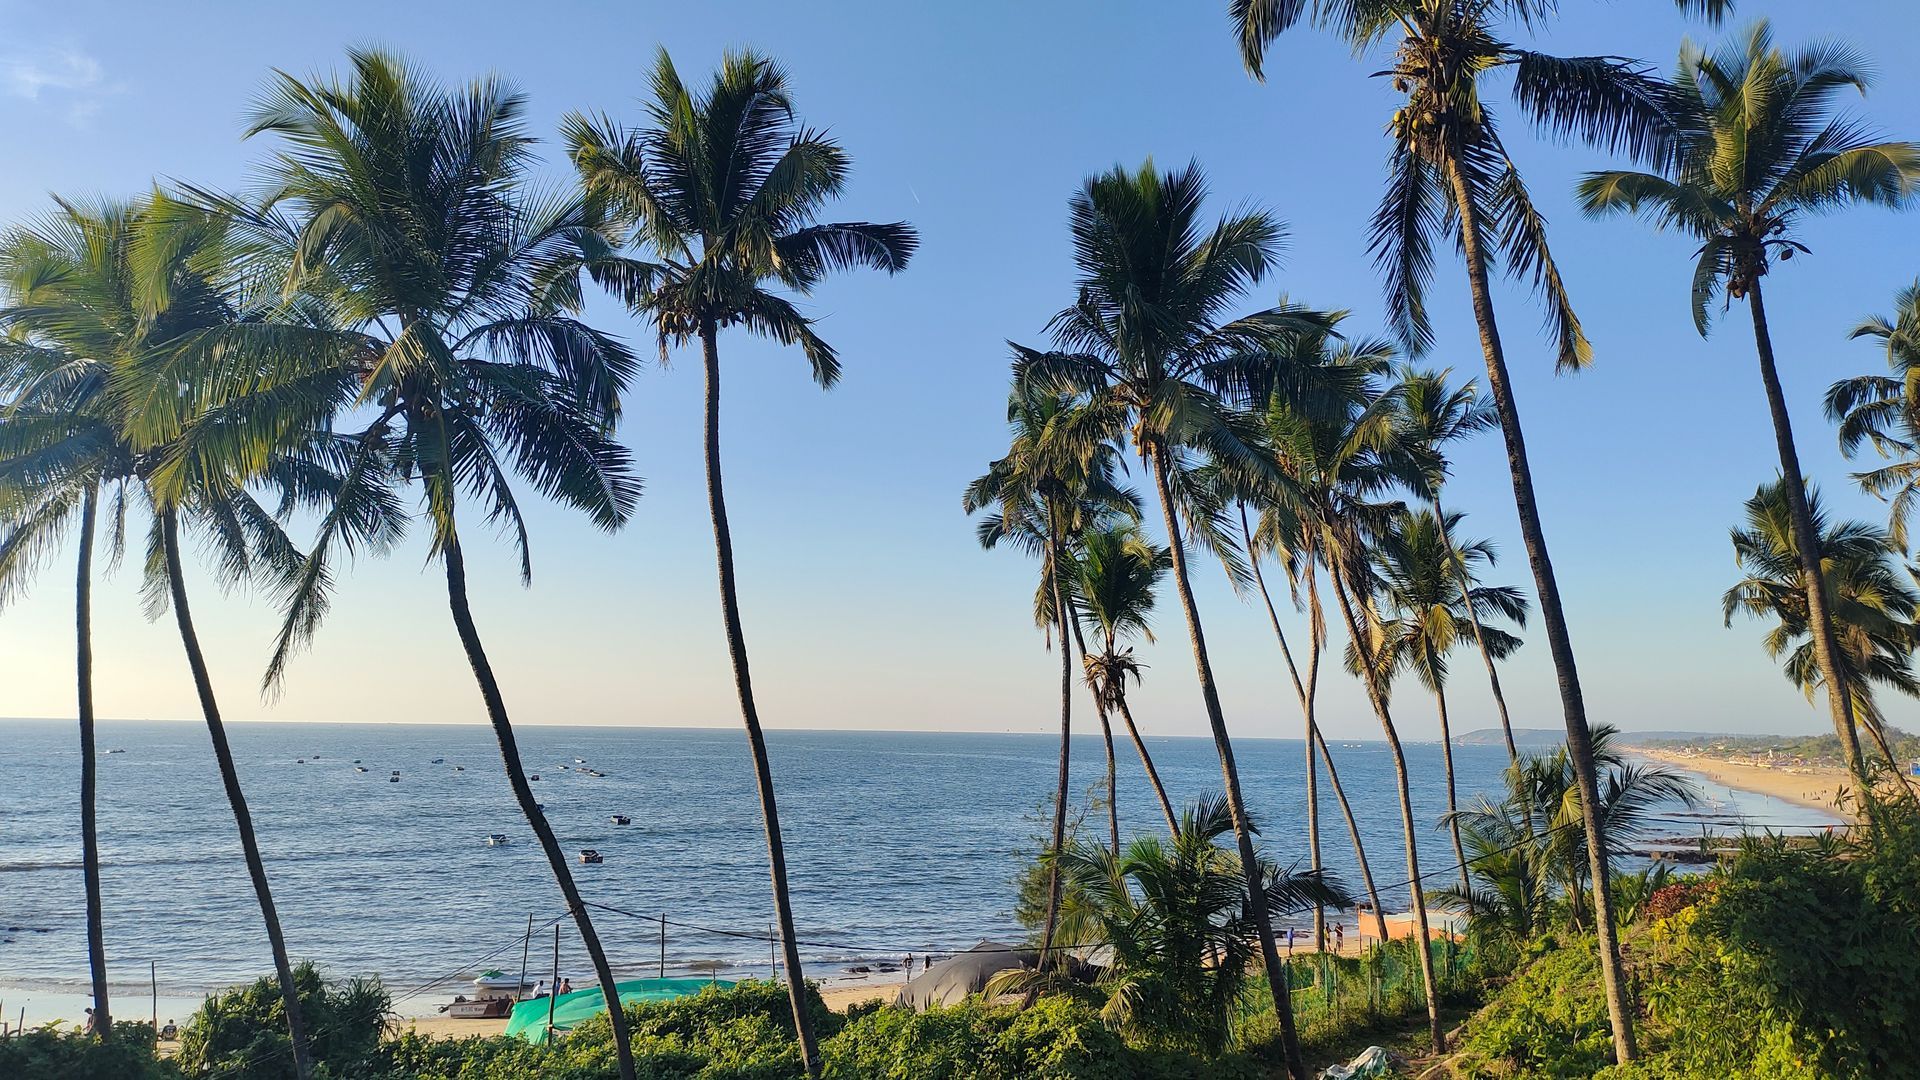 A row of palm trees on a beach overlooking the ocean